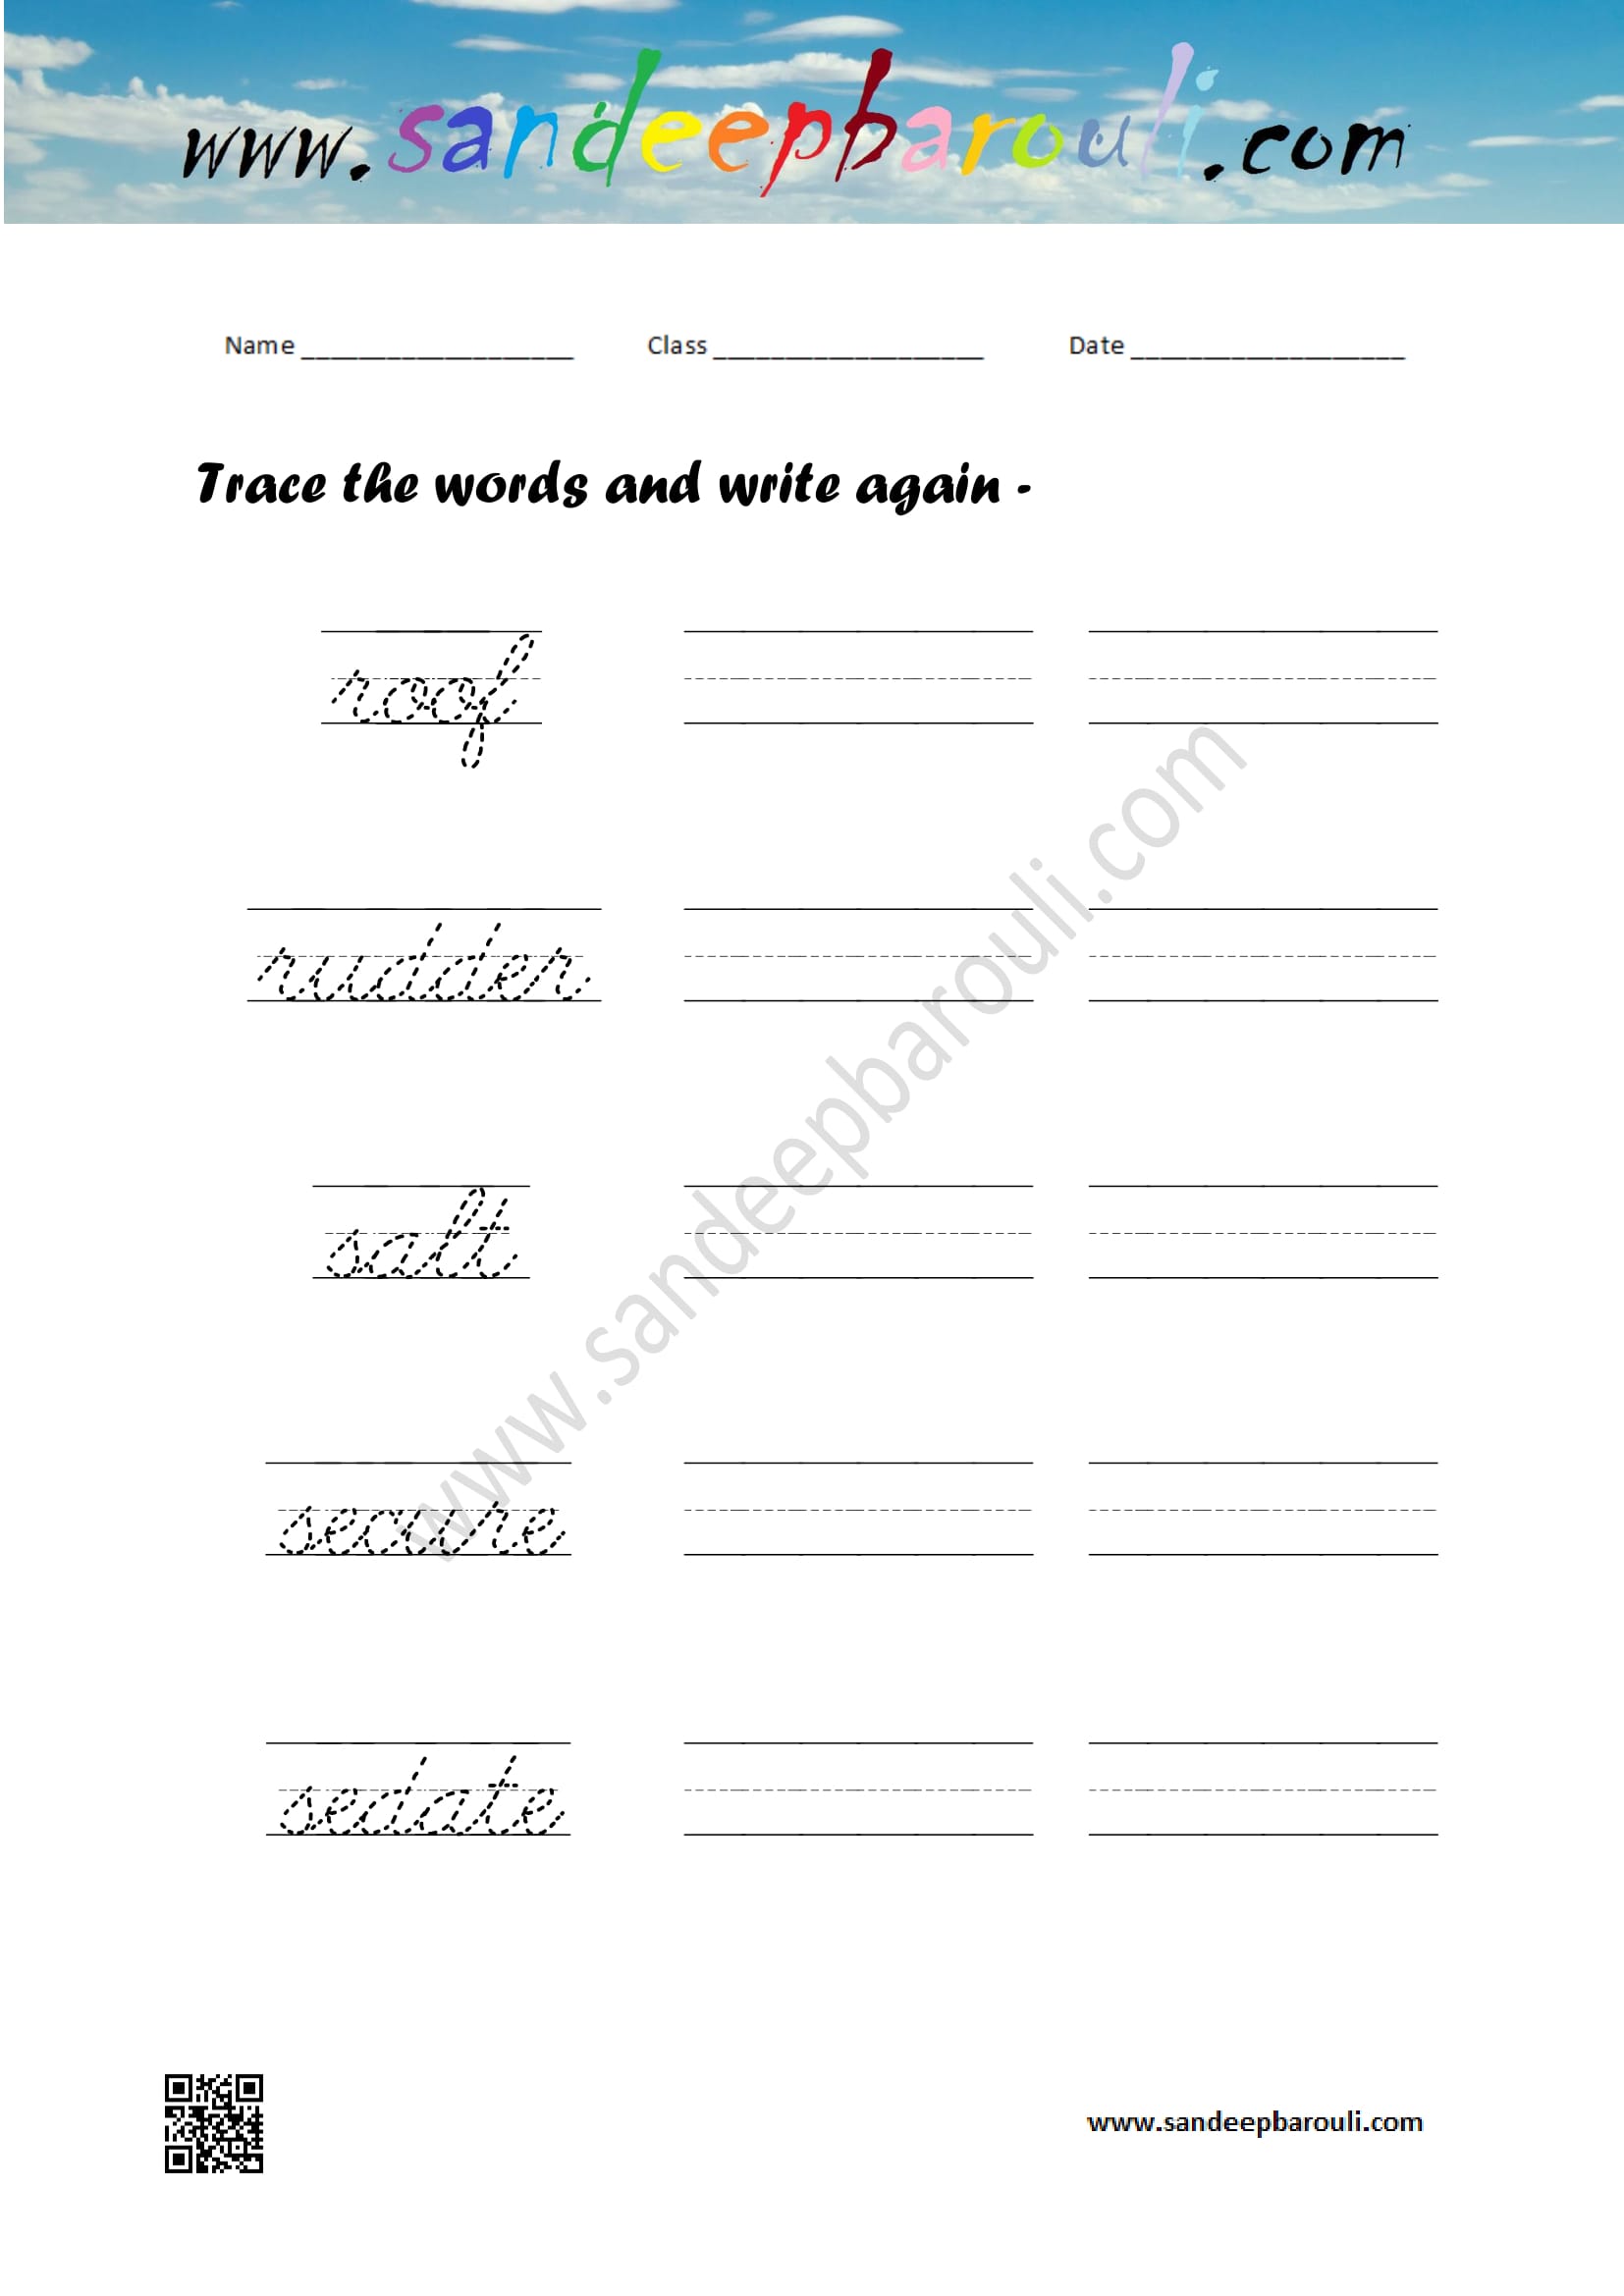 Cursive writing worksheet – trace the words and write again (106)